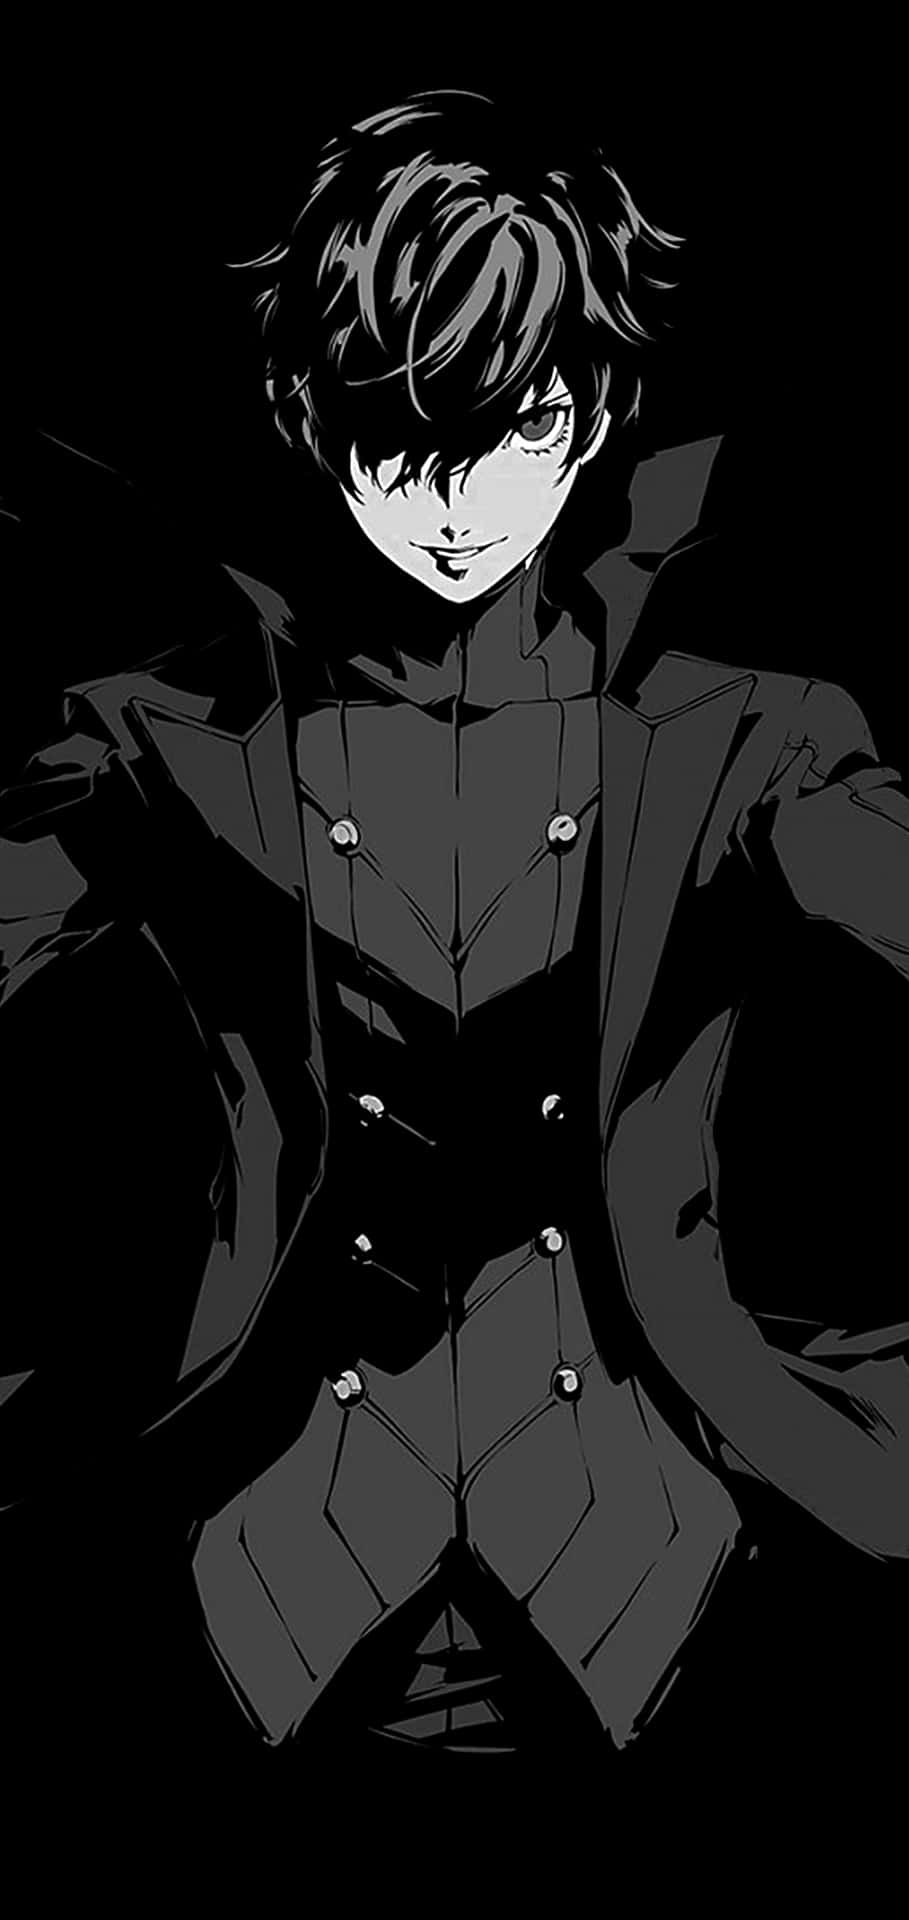 A mysterious dark-haired anime boy with an enigmatic aura. Wallpaper